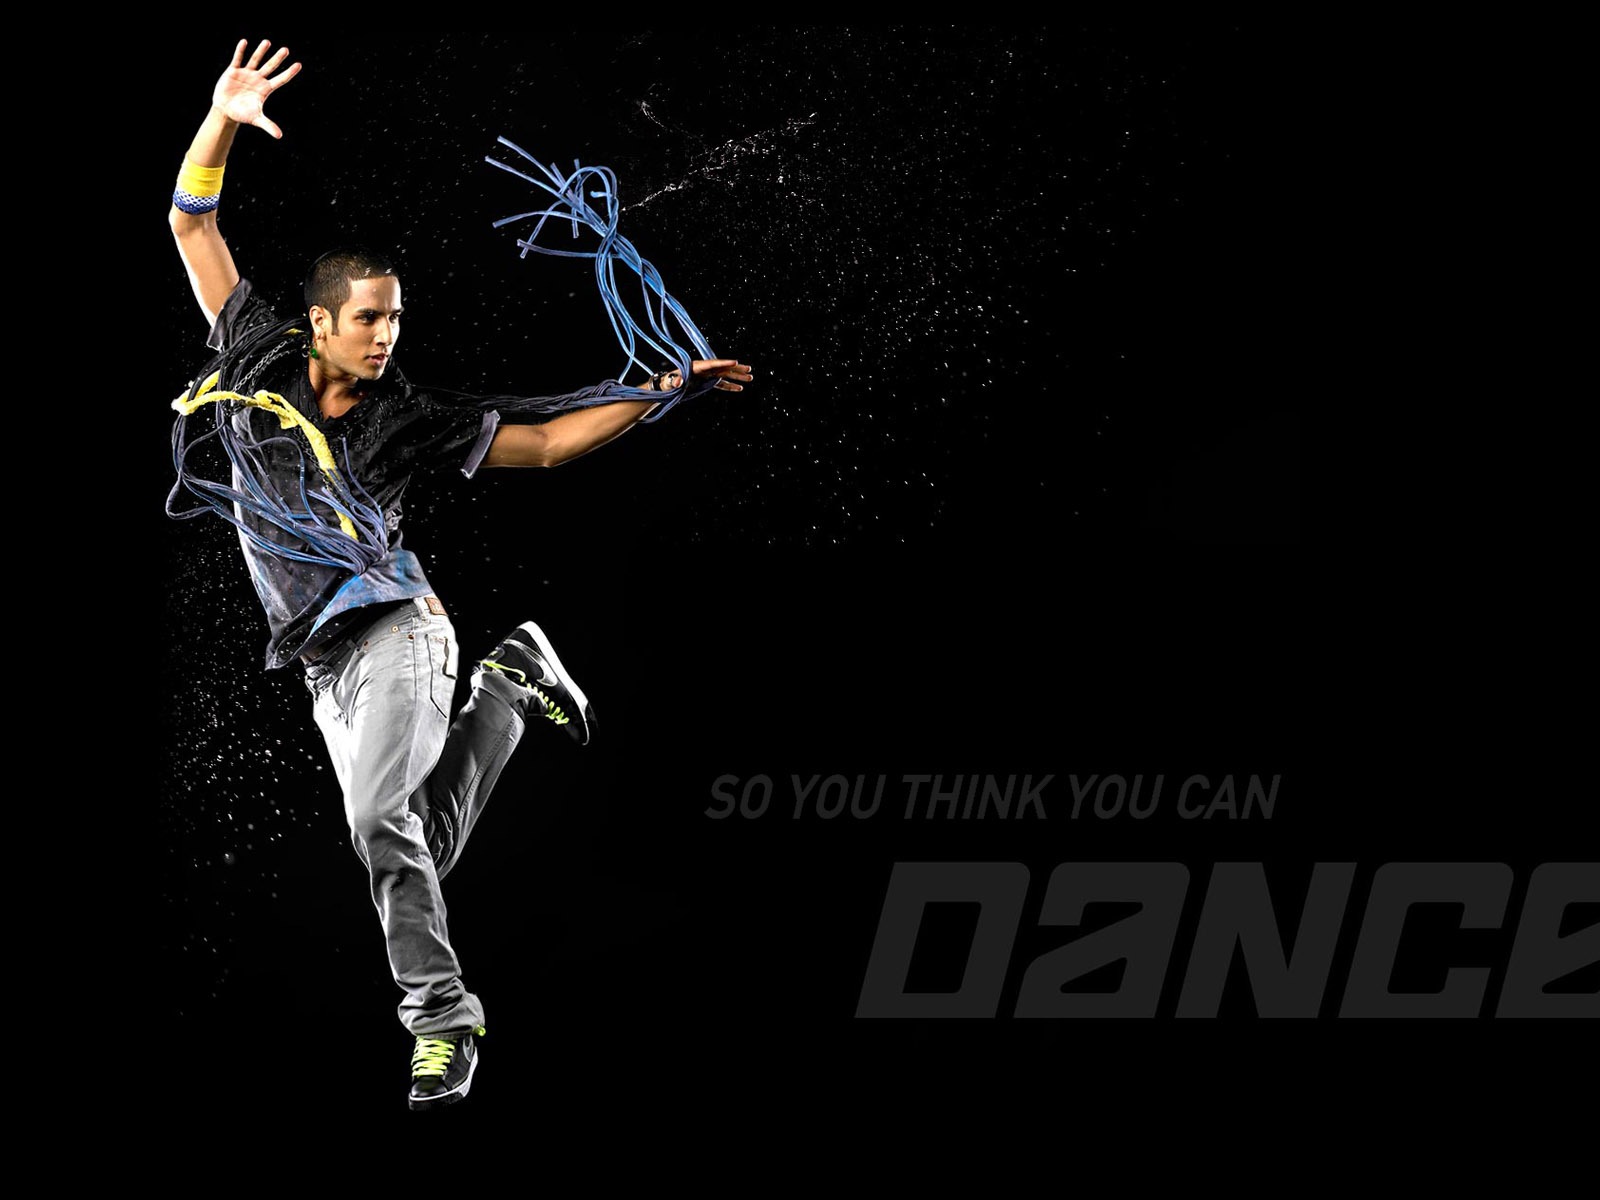 So You Think You Can Dance 舞林争霸 壁纸(一)4 - 1600x1200